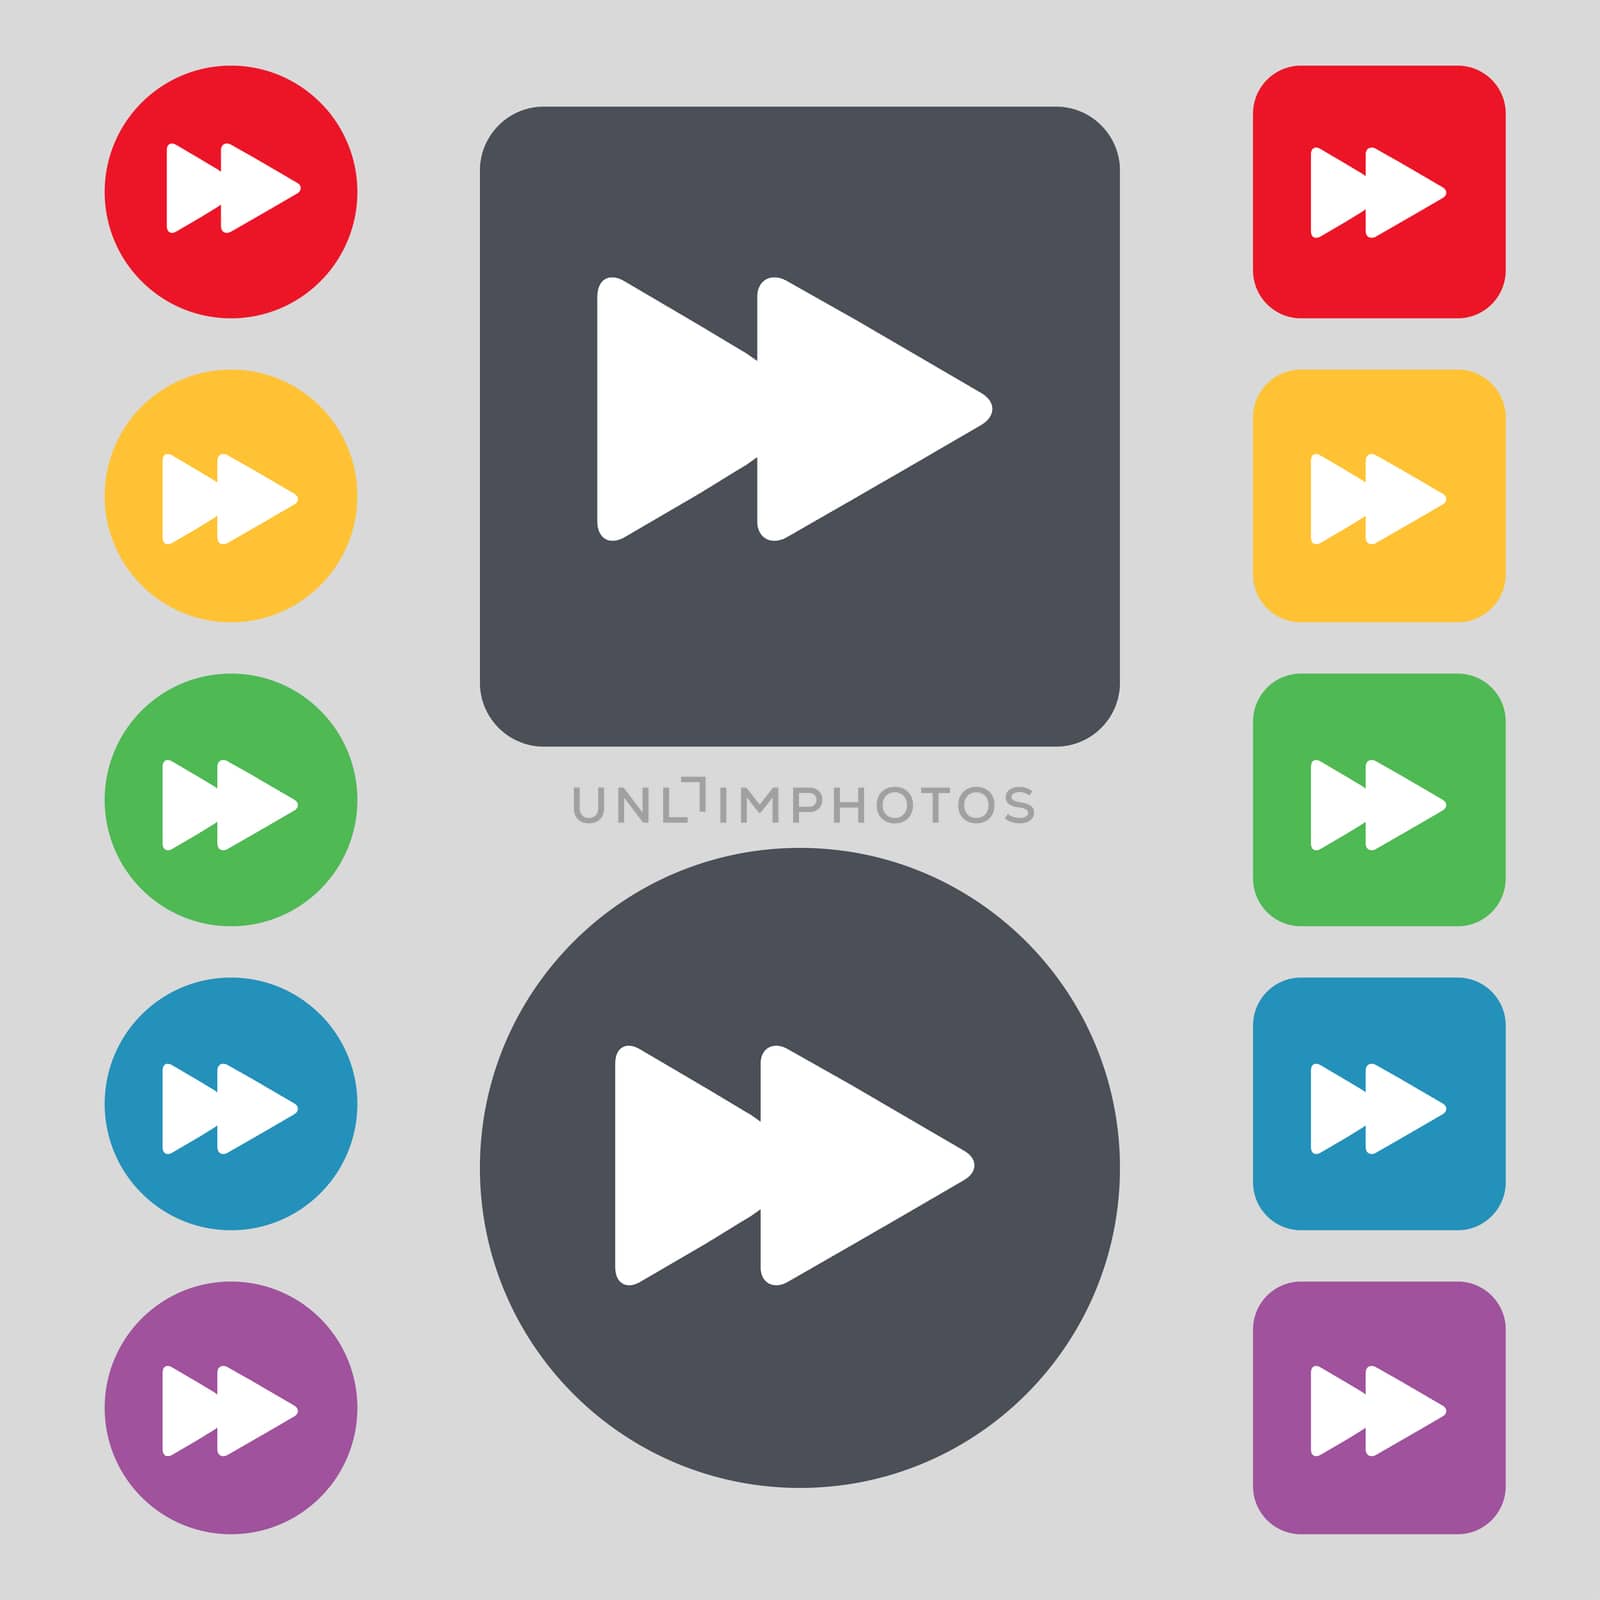 rewind icon sign. A set of 12 colored buttons. Flat design. illustration